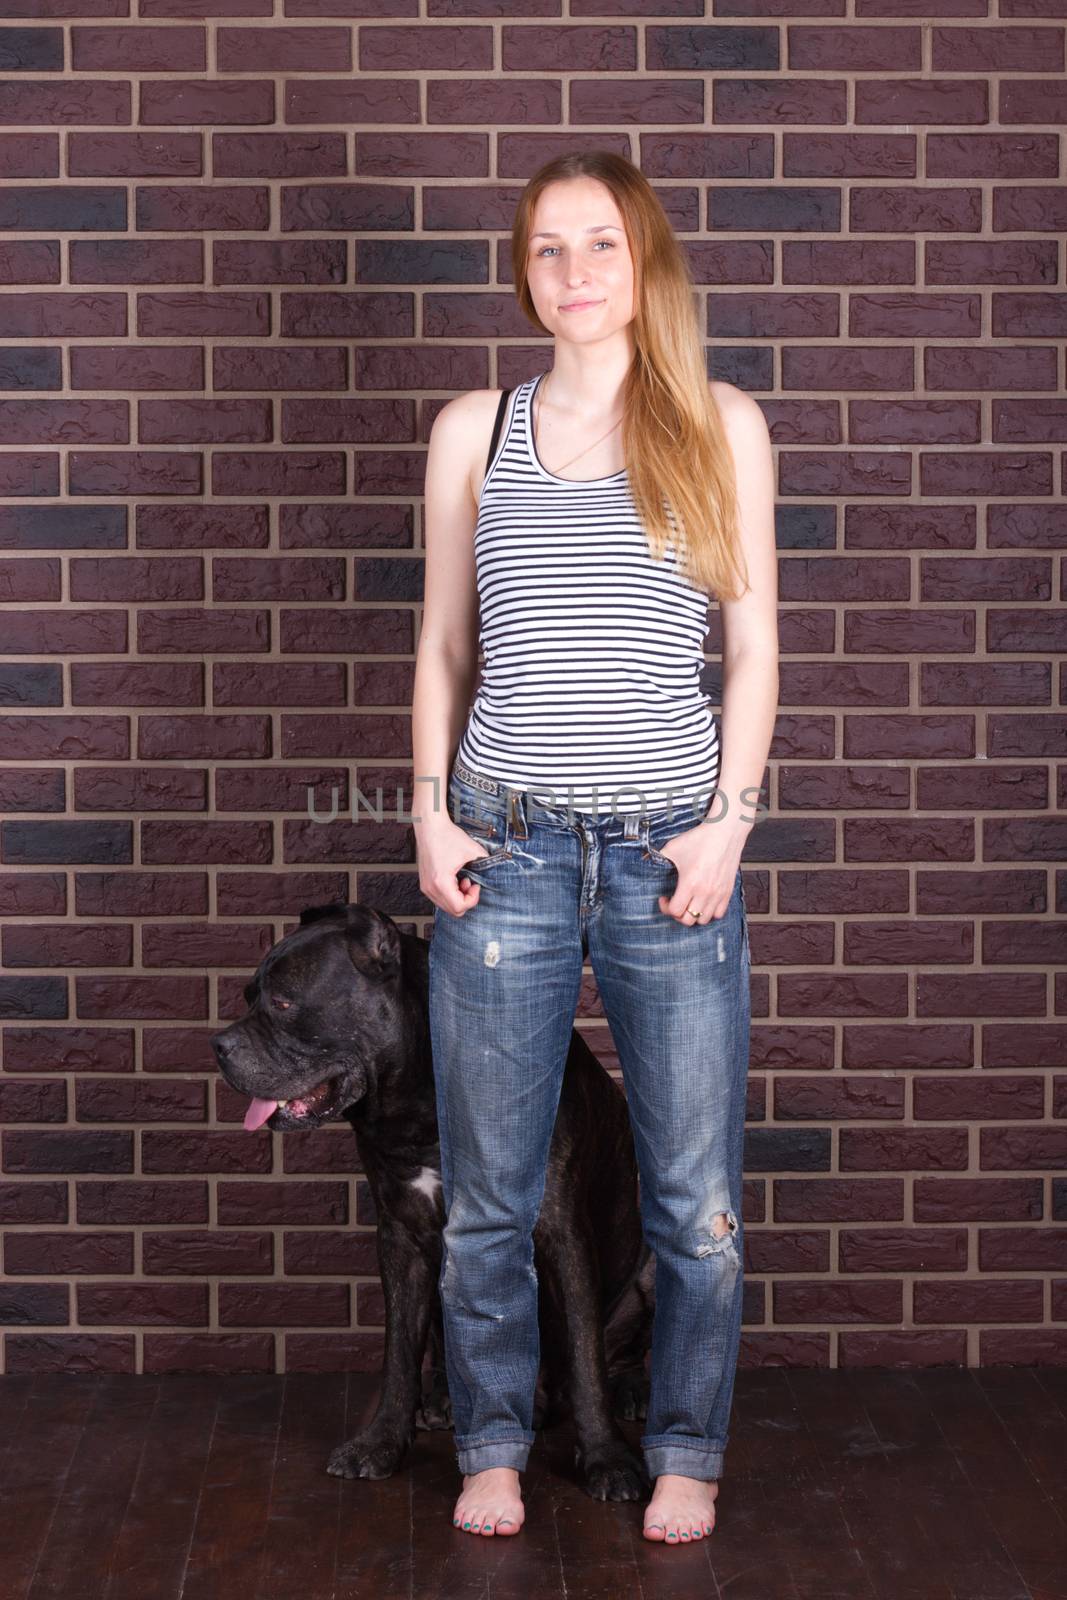 girl in jeans, shirt standing near the wall and hugging a dog Cane Corso by victosha